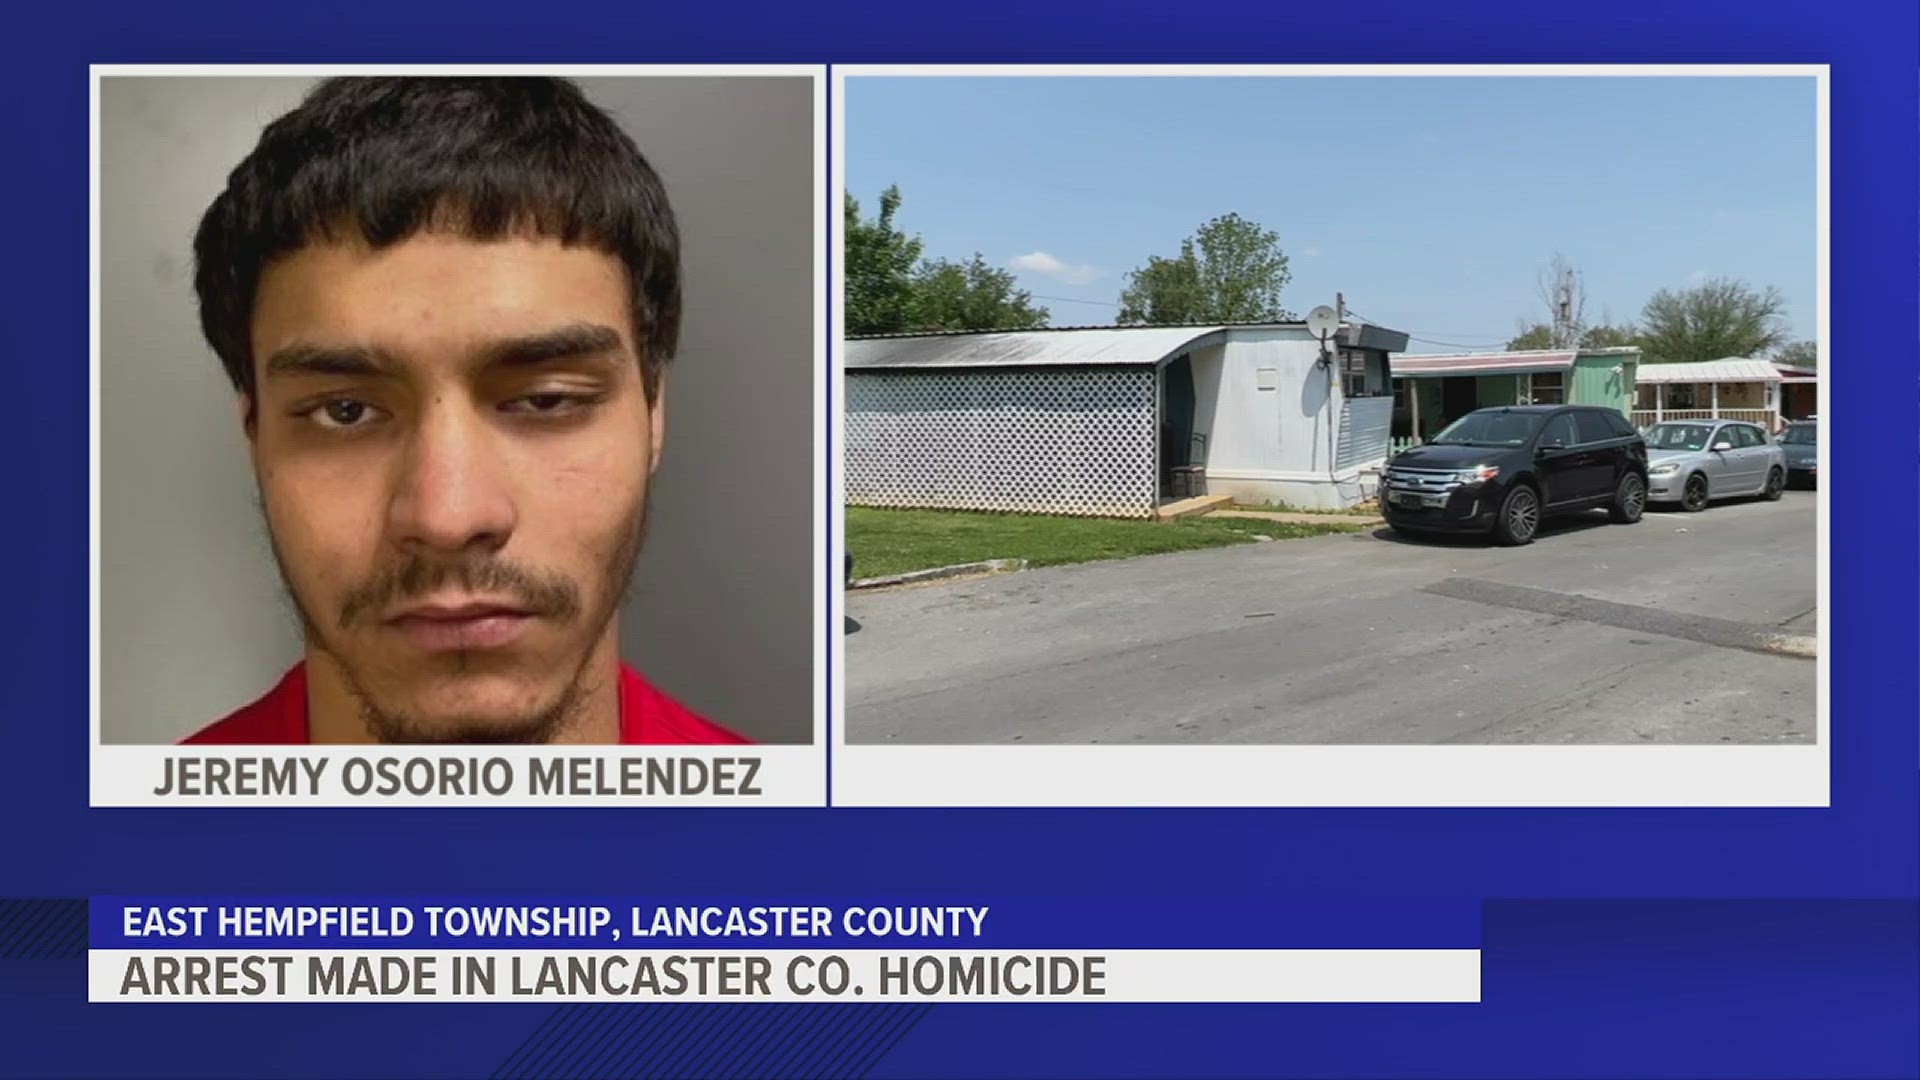 Jeremy Osorio Melendez, 19, is alleged to have shot a 29-year-old man who died at the hospital from his injuries.